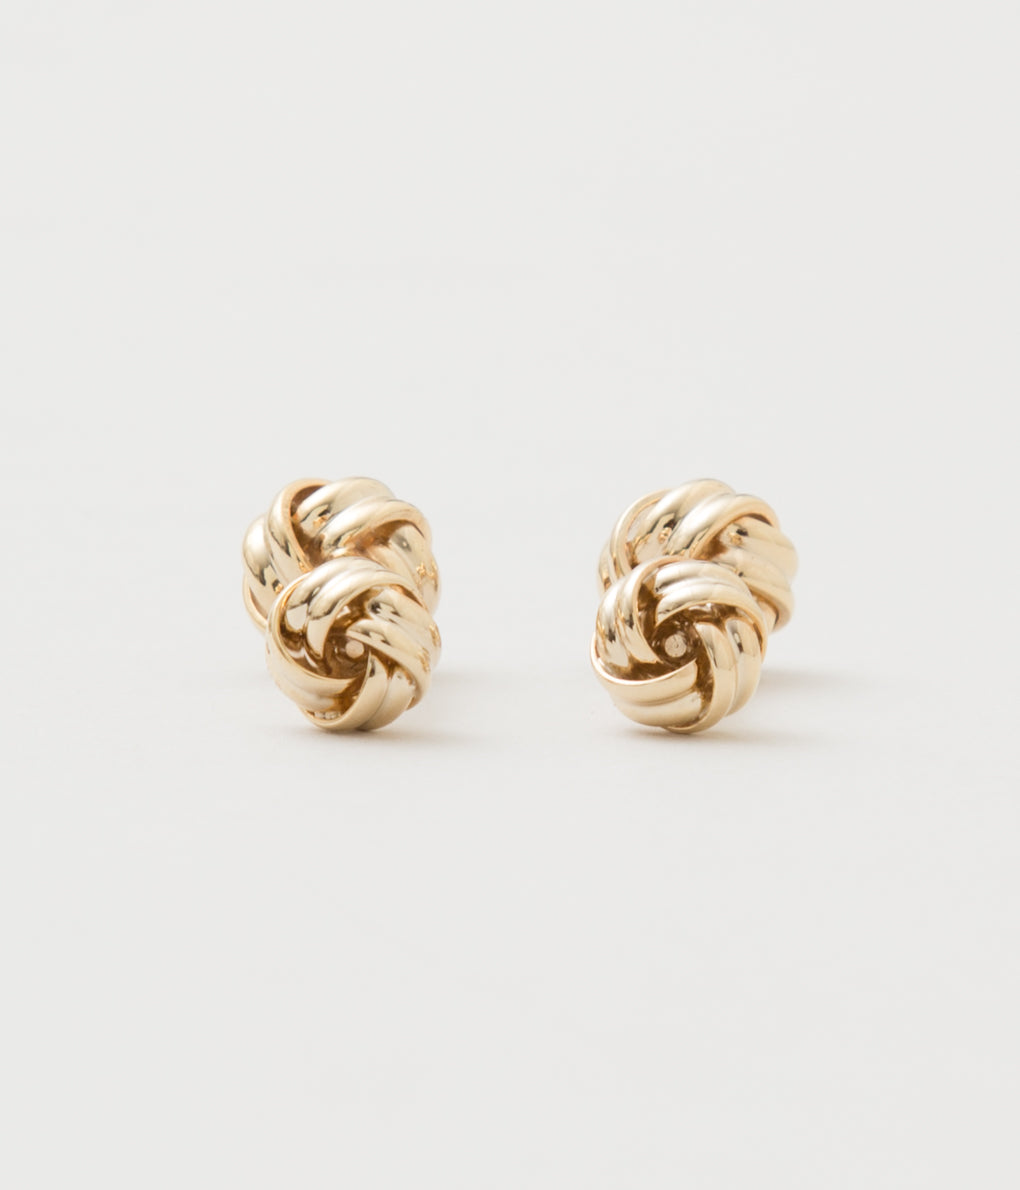 FINE AND DANDY "CUFF LINKS KNOT" (GOLD)